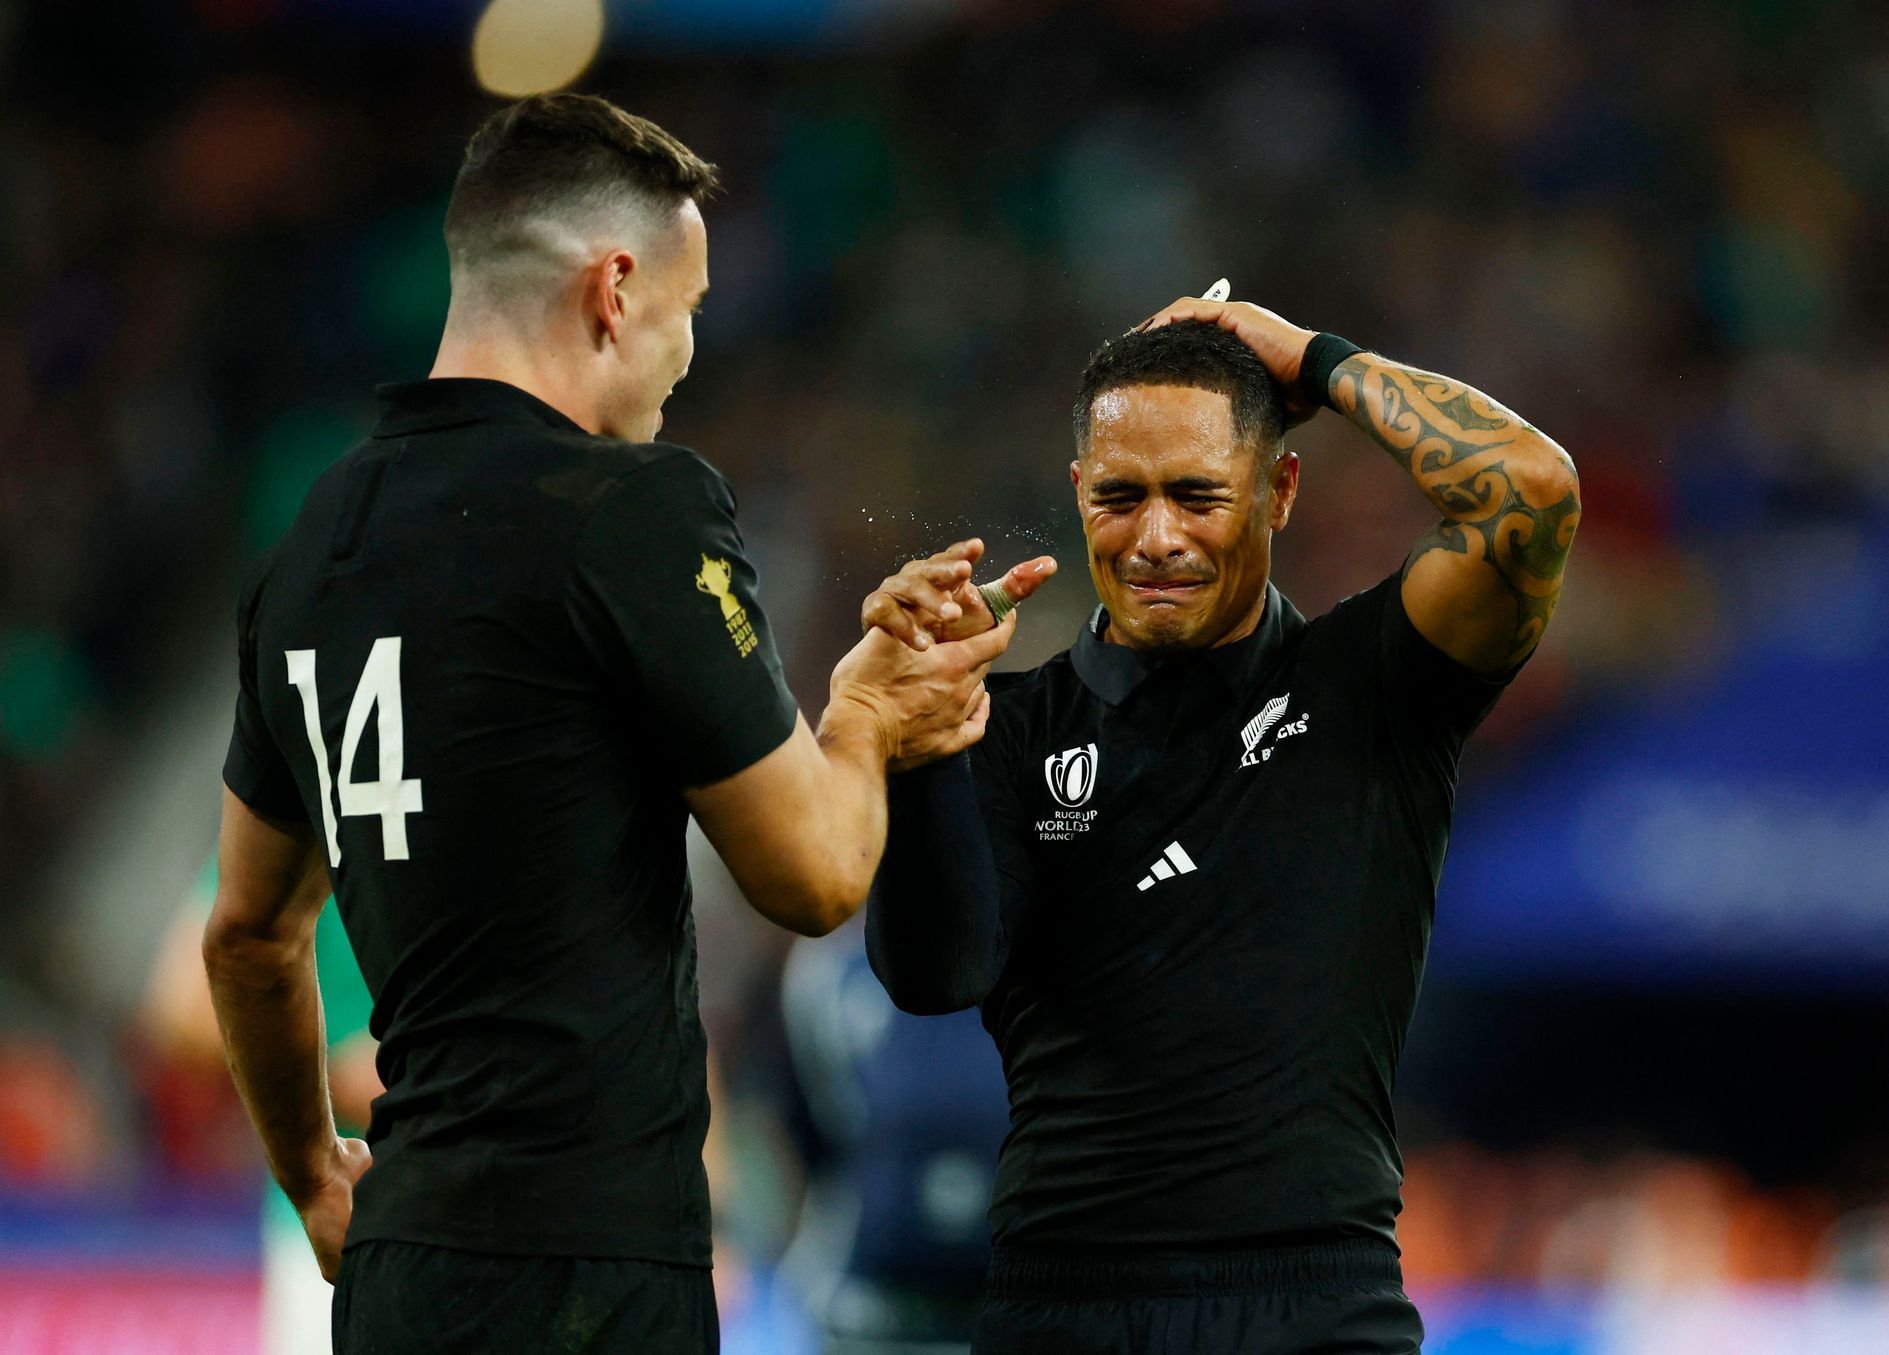 The All Blacks advance.  They eliminated Ireland in the final battle for the World Cup semi-finals.